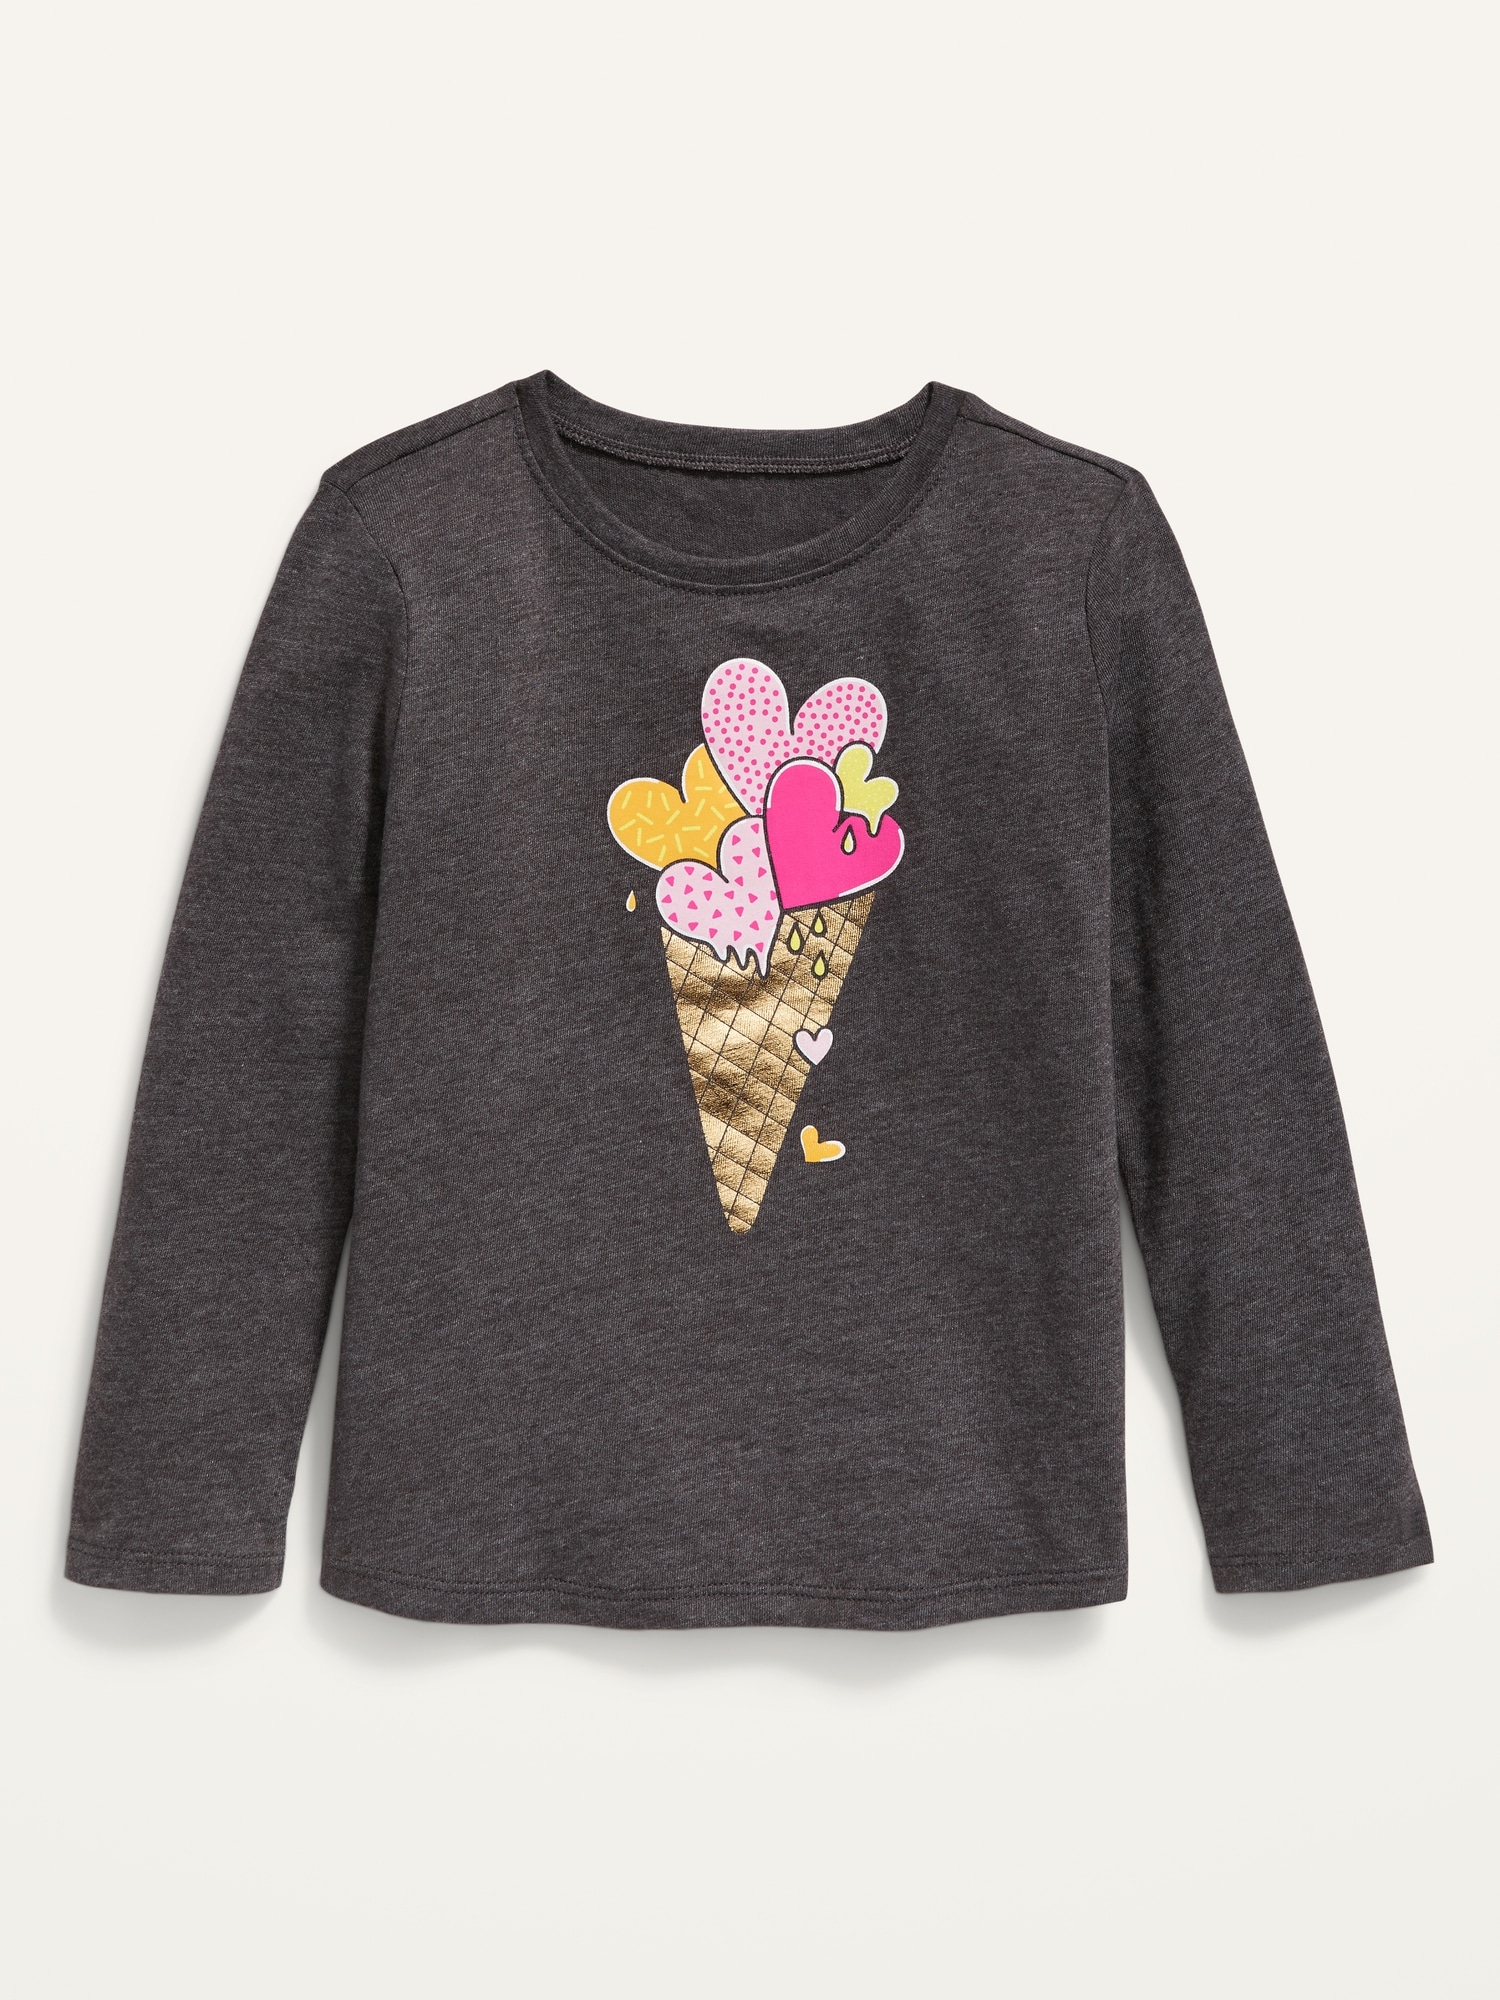 Long-Sleeve Graphic Tee for Toddler Girls 